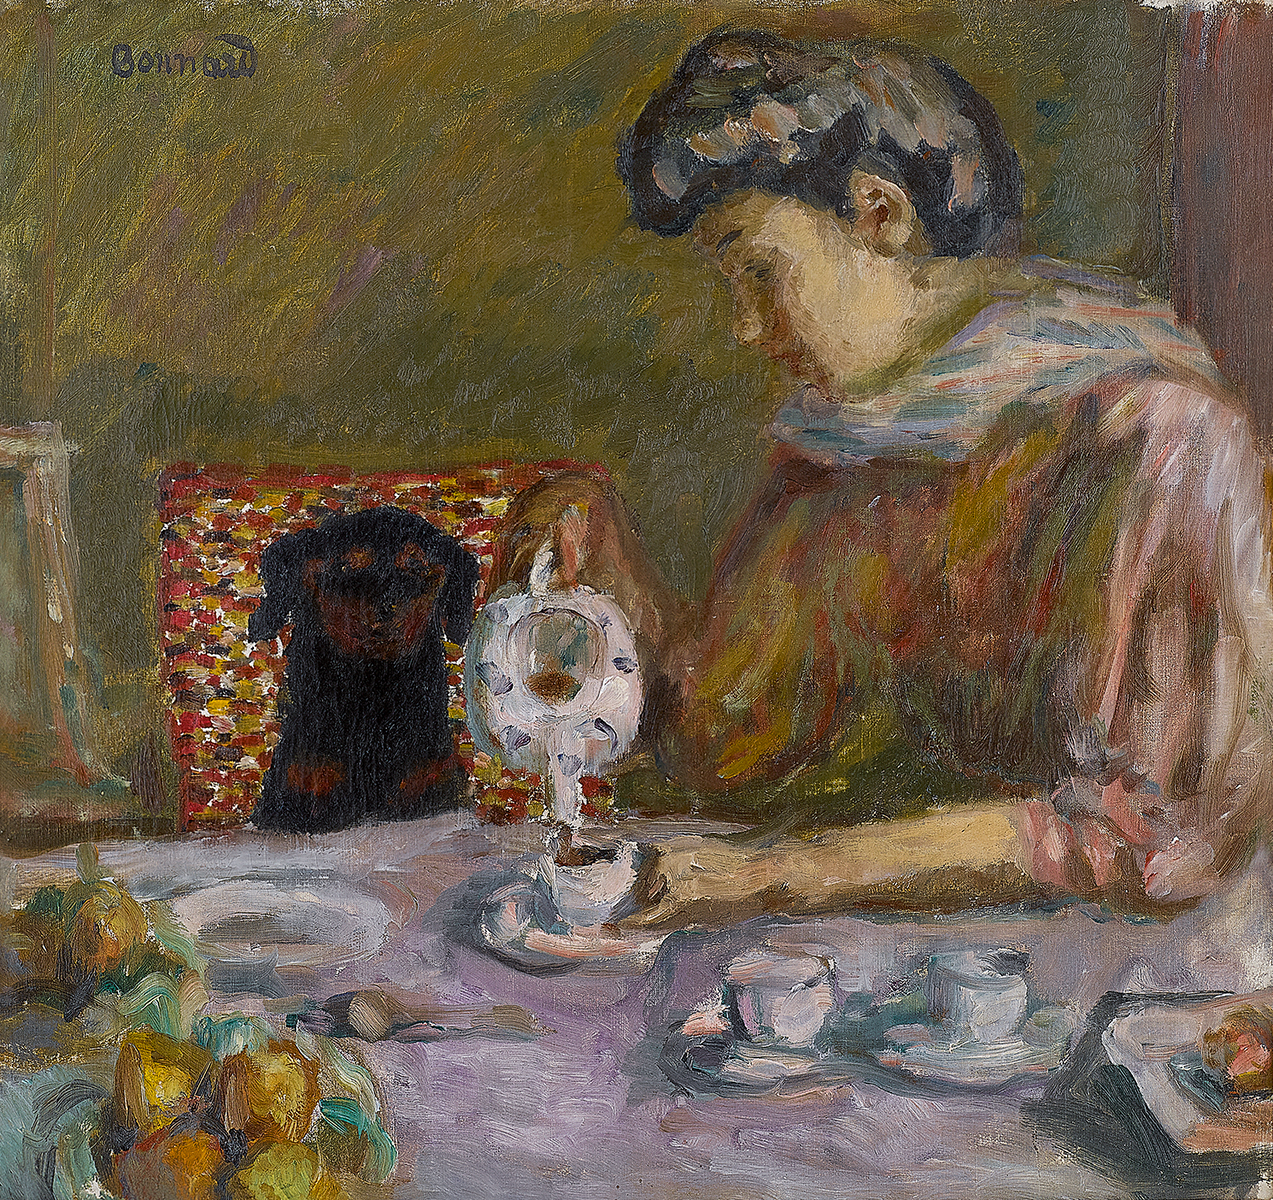 Painting of a woman seated at a table, pouring a pot of coffee watched by a small dog sitting in a chair.